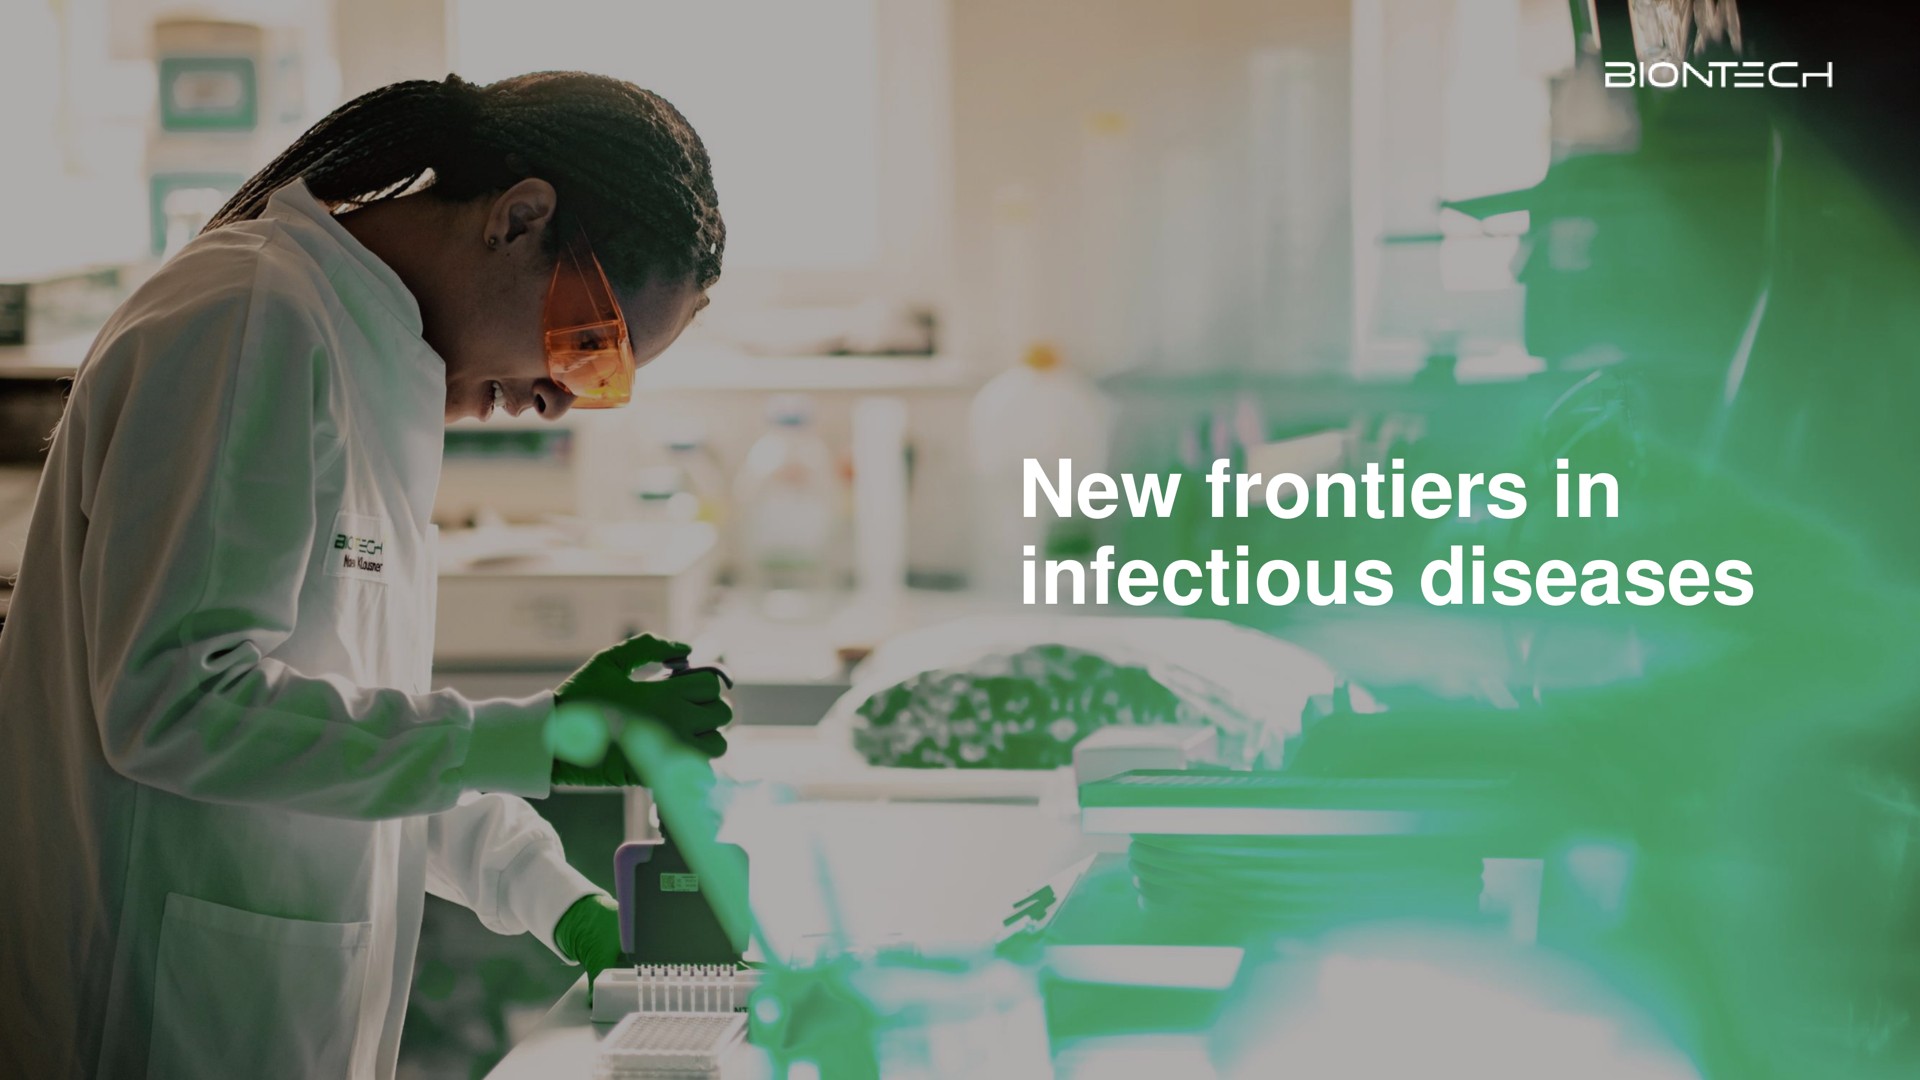 new frontiers in new frontiers in infectious diseases infectious diseases | BioNTech